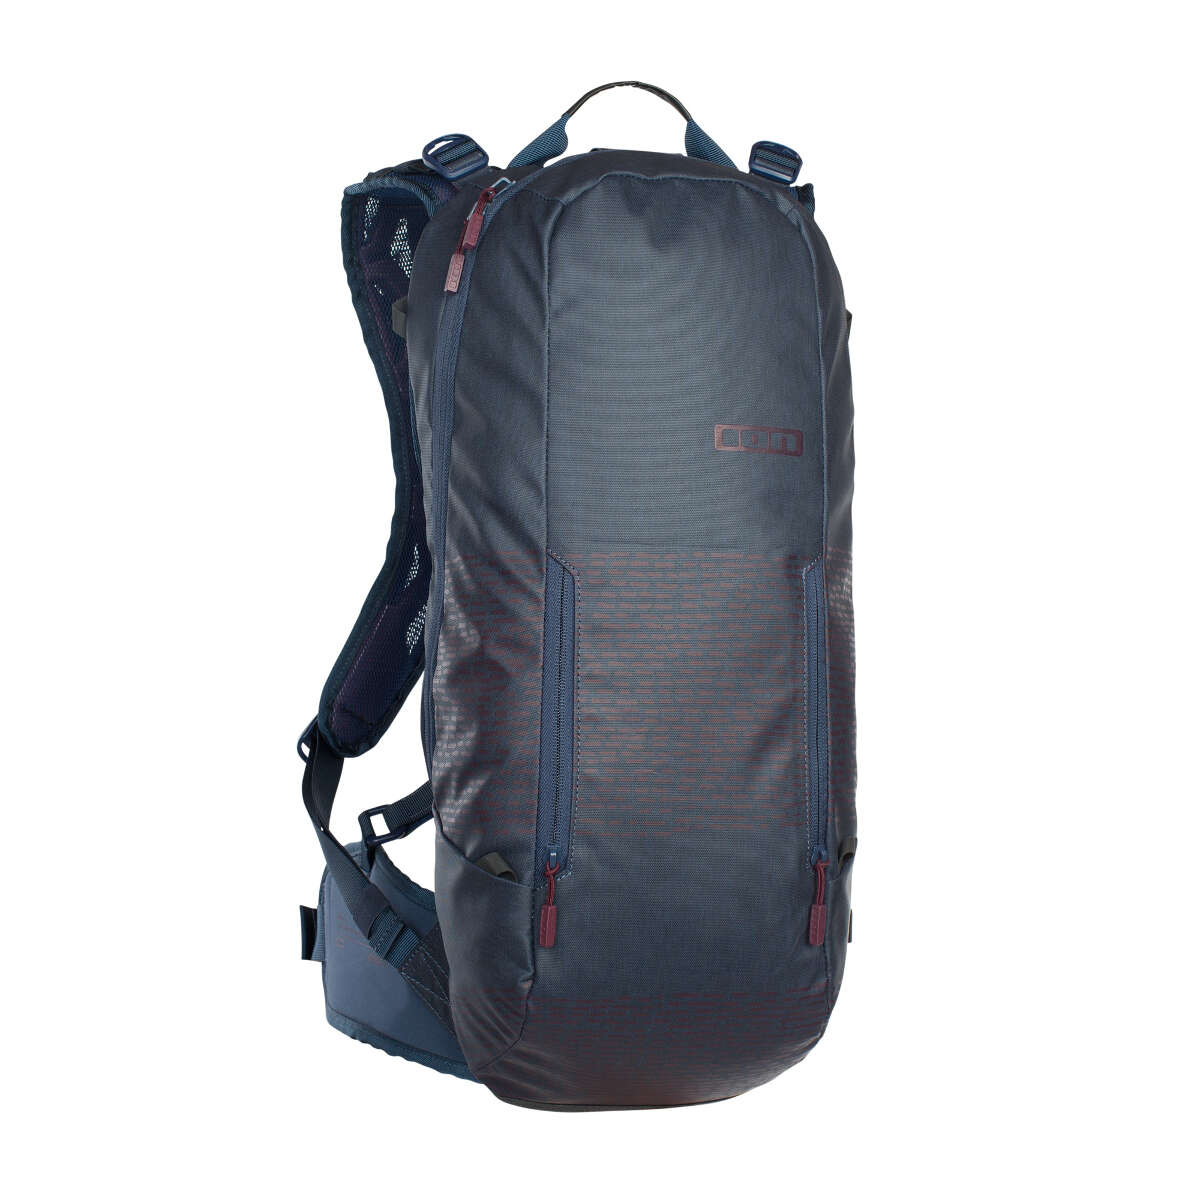 ION Backpack with Hydration System Compartment Rampart 8 Blue Nights, 8 L